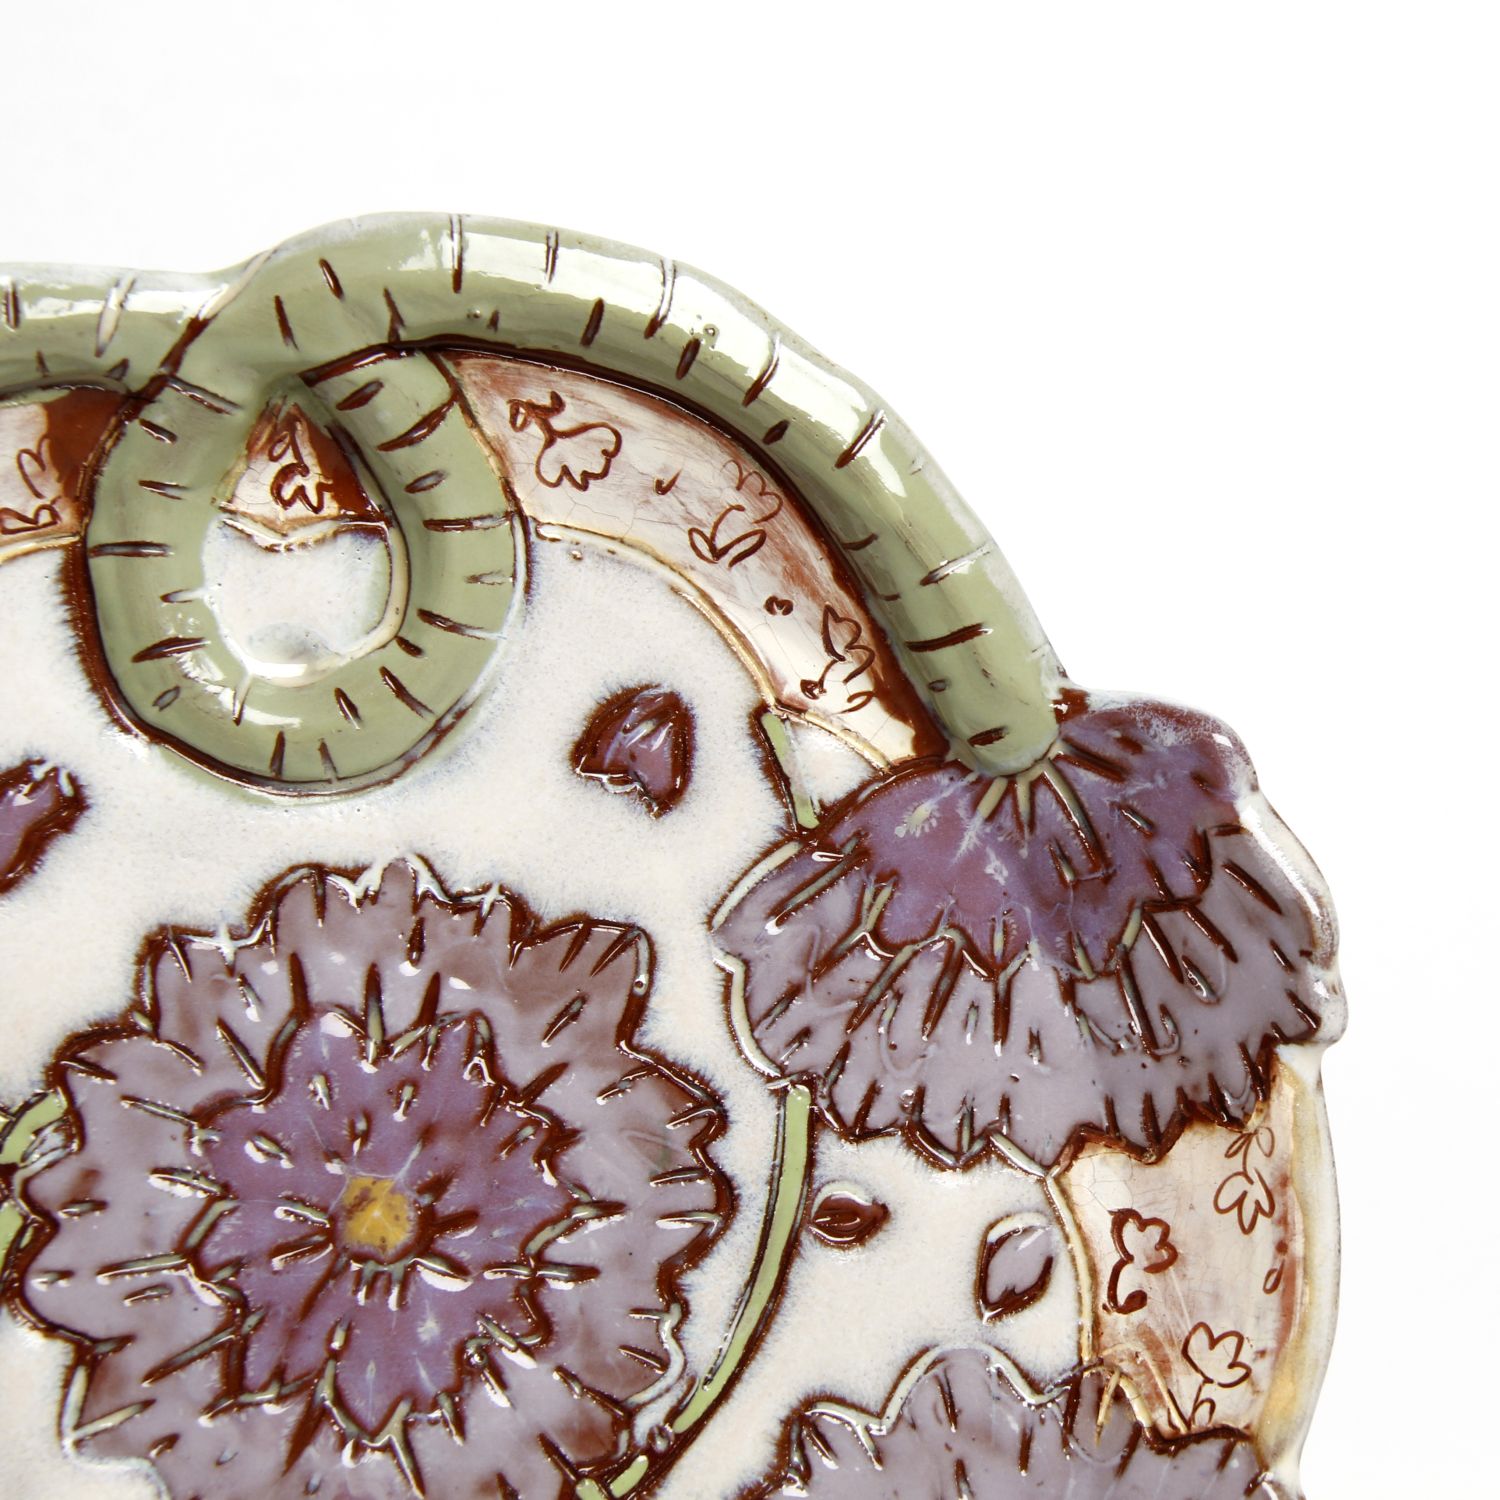 Zoe Pinnell: Purple Flower Plate Product Image 3 of 3